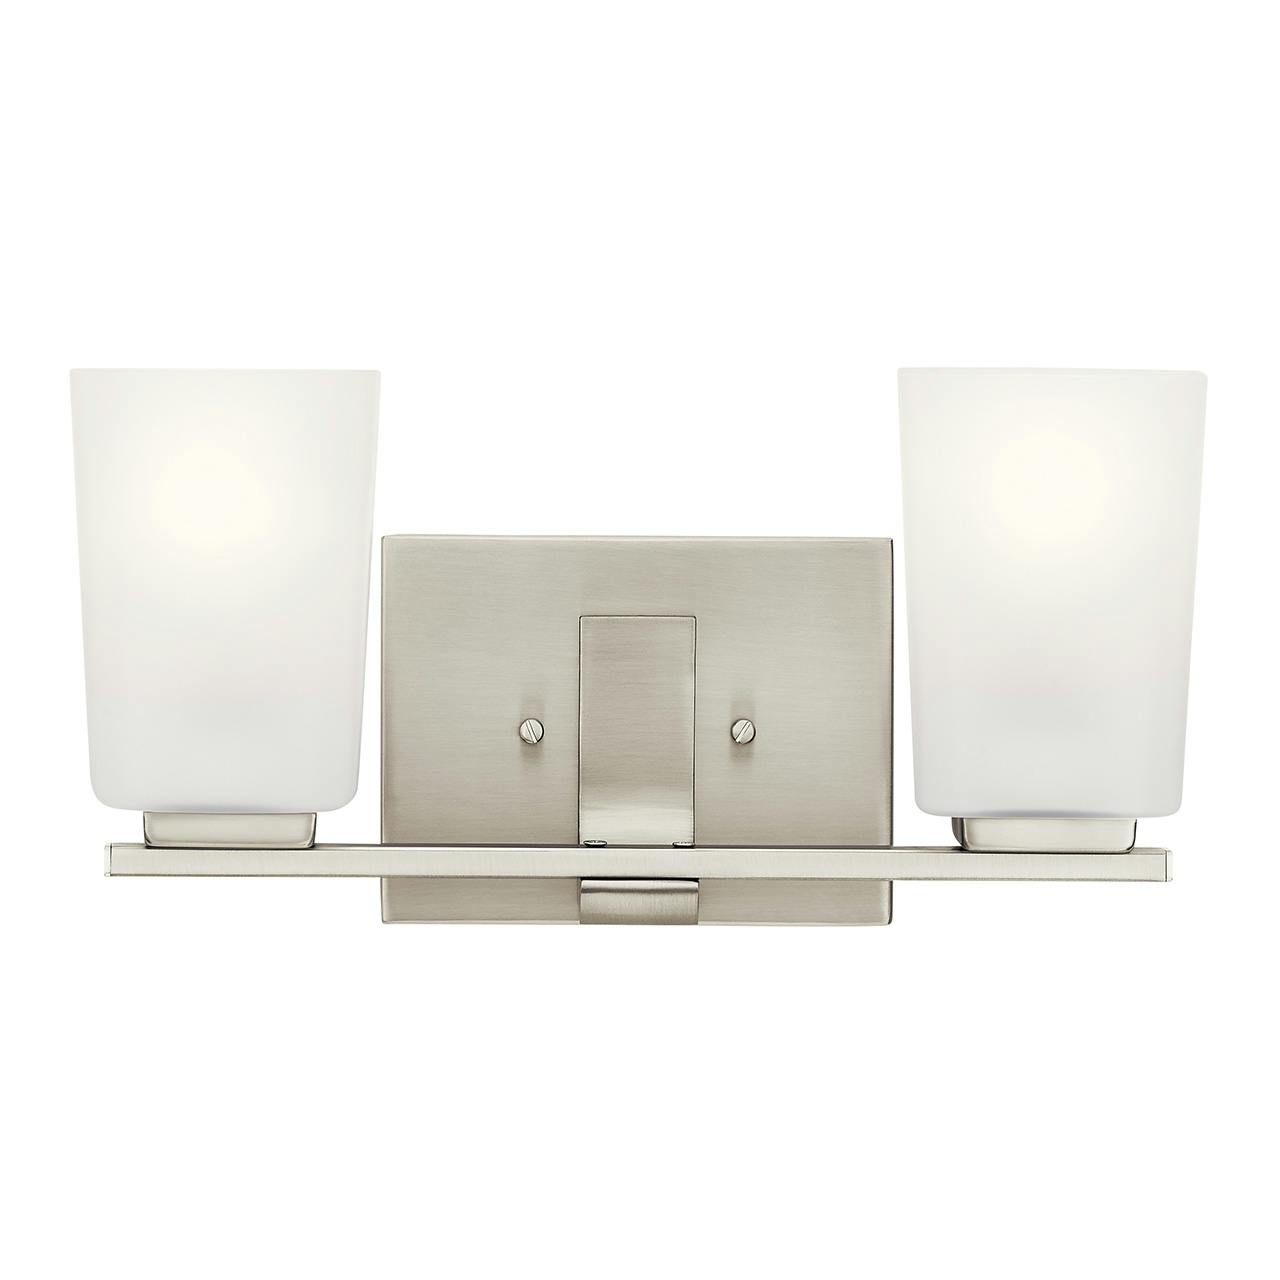 The Roehm 2 Light Vanity Light Brushed Nickel facing up on a white background